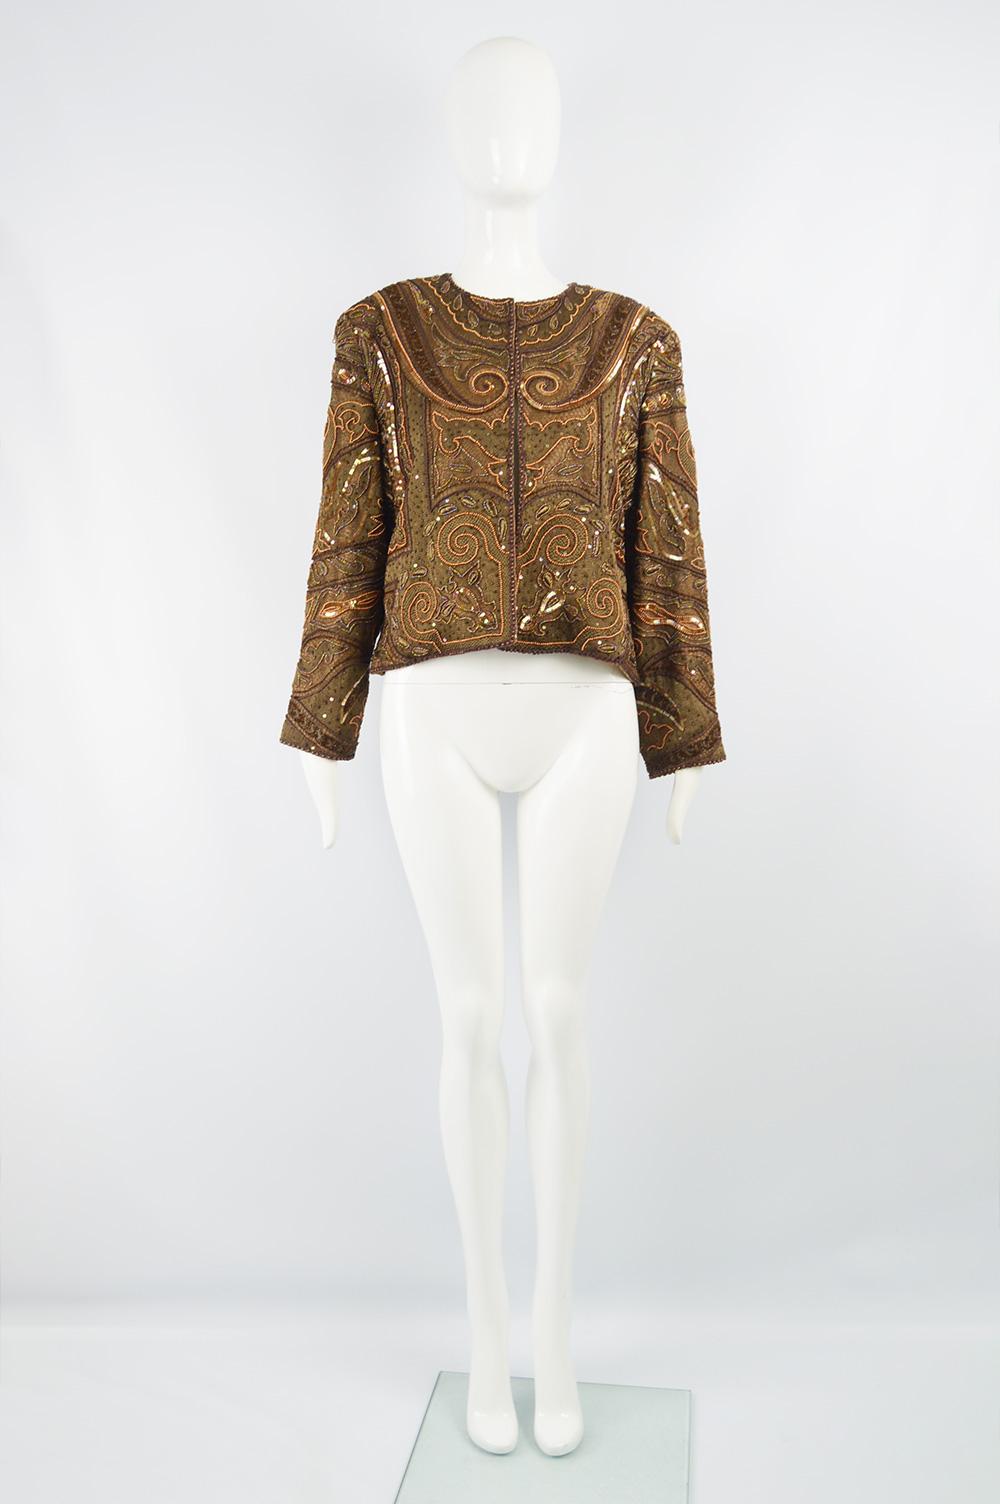 Richilene Vintage Intricately Beaded & Embroidered Shoulder Padded Trophy Jacket

Size: Not indicated; fits like a UK 16-18/ US 12-14/ EU 44-46. Please check measurements.
Bust - 44” / 112cm (allow a couple inches room for movement)
Waist - 42” /